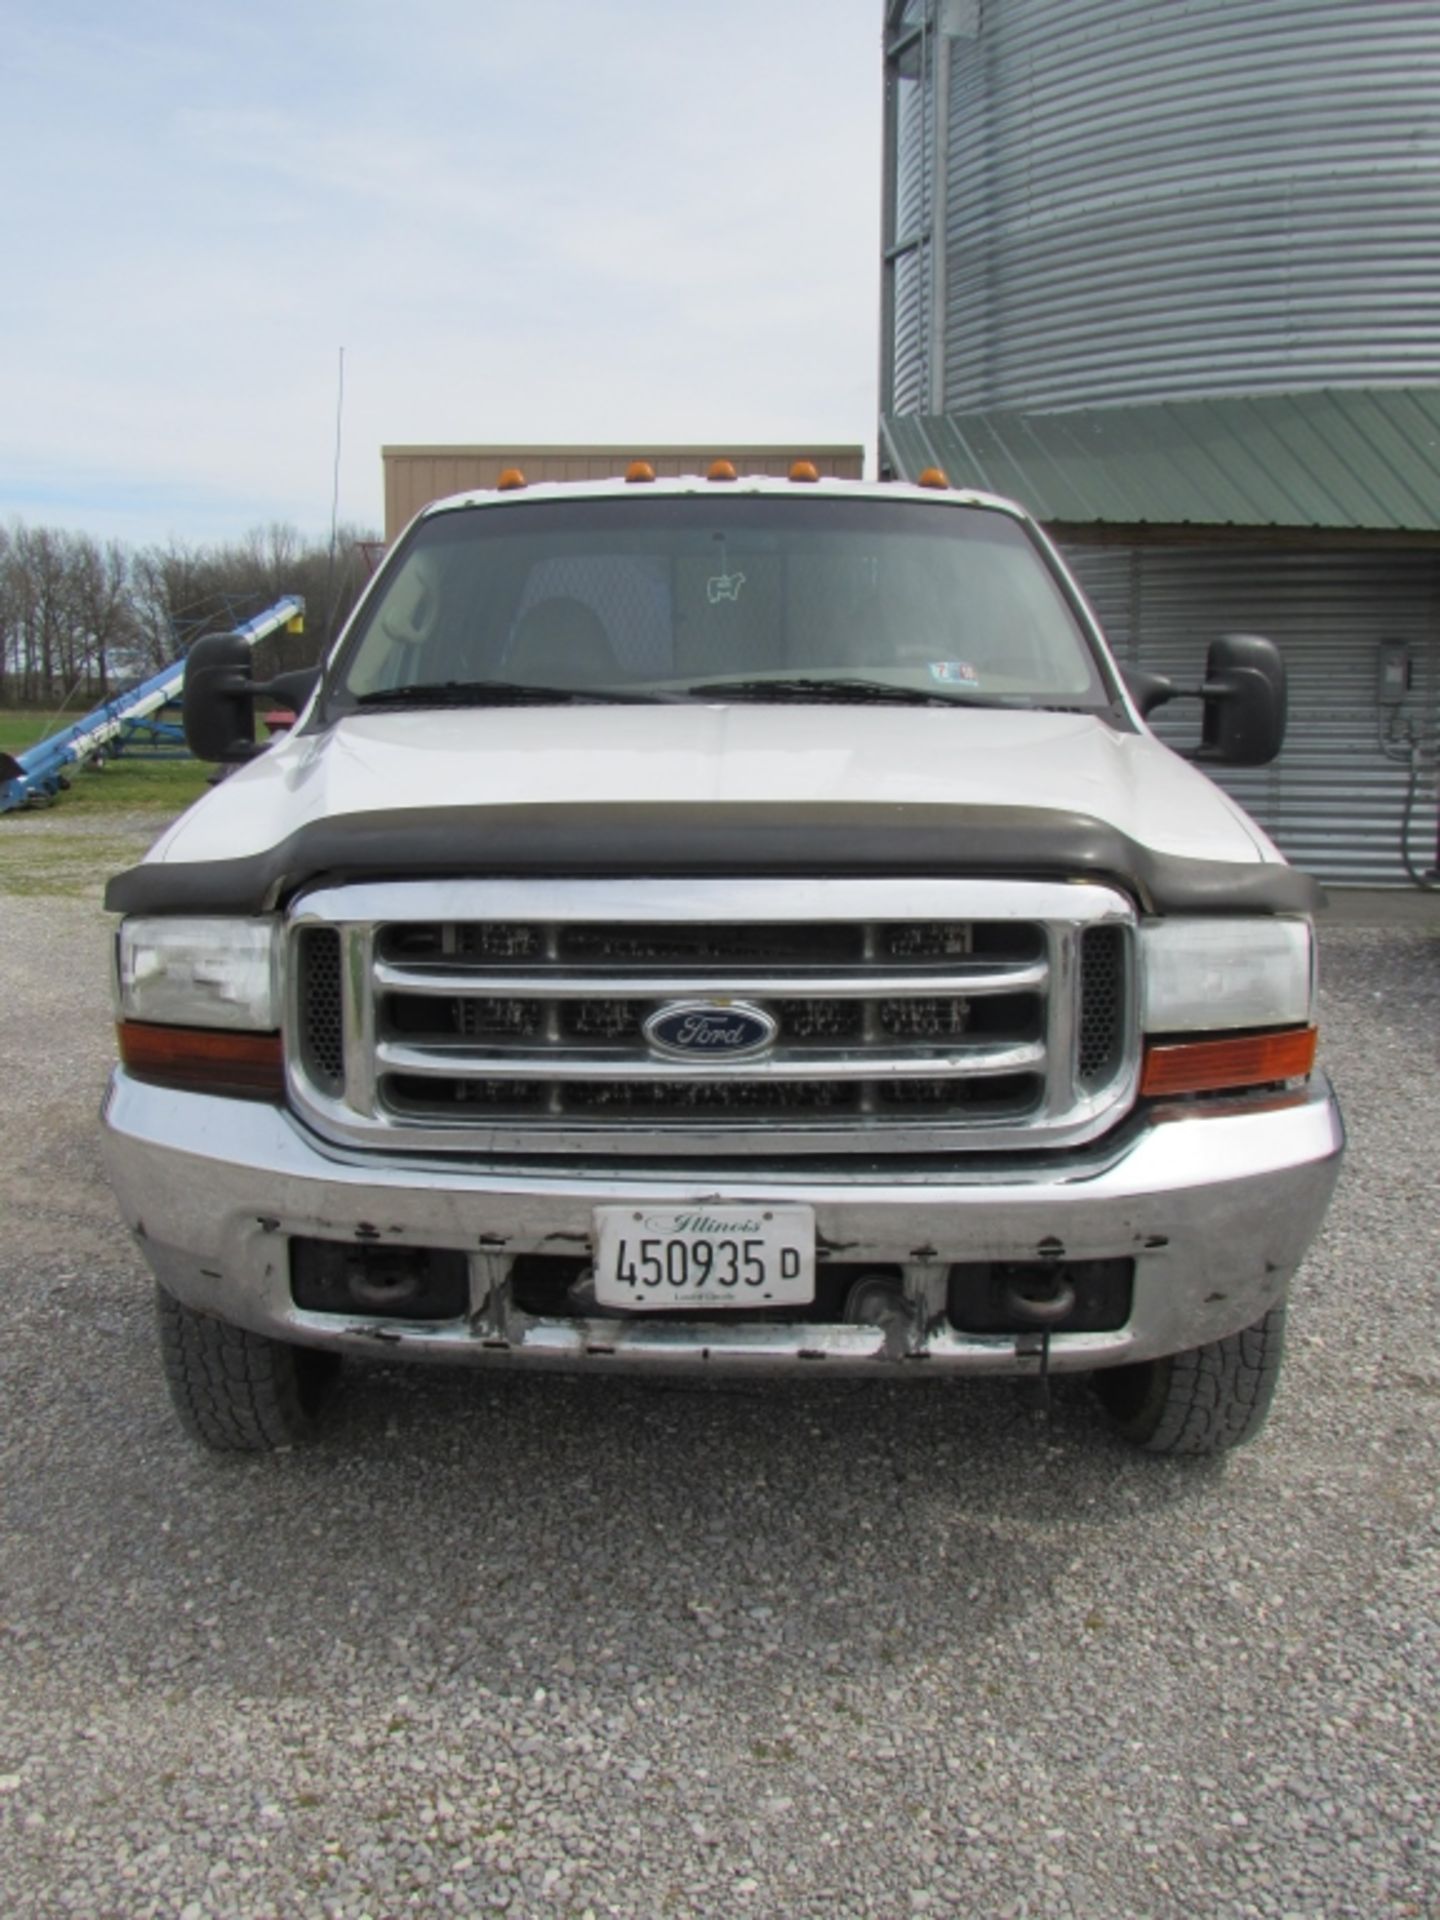 2001 Ford F350 Lariat Flatbed 4wd 7.3 L Powerstroke Diesel Engine - Image 11 of 21